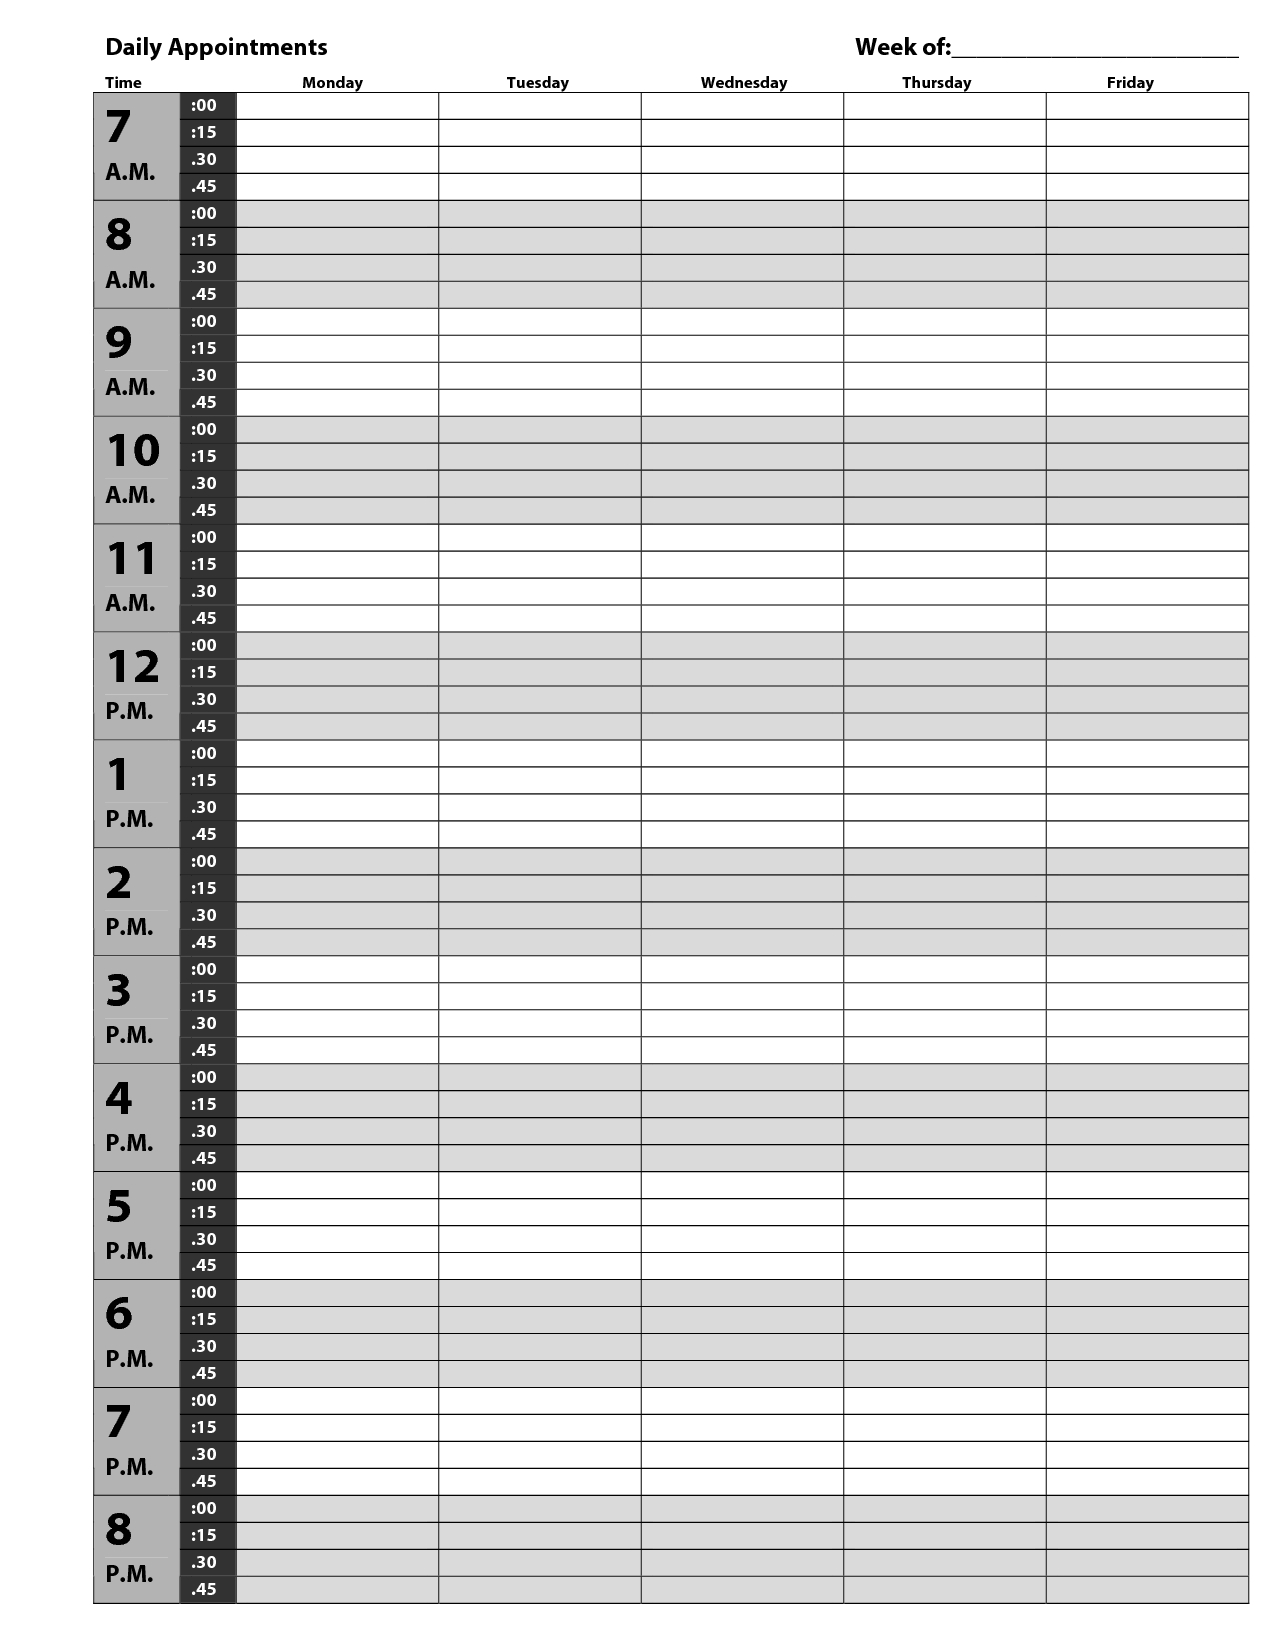 Appointment Book - Pdf | Job | Appointment Calendar, Daily Planner - Appointment Book Template Free Printable